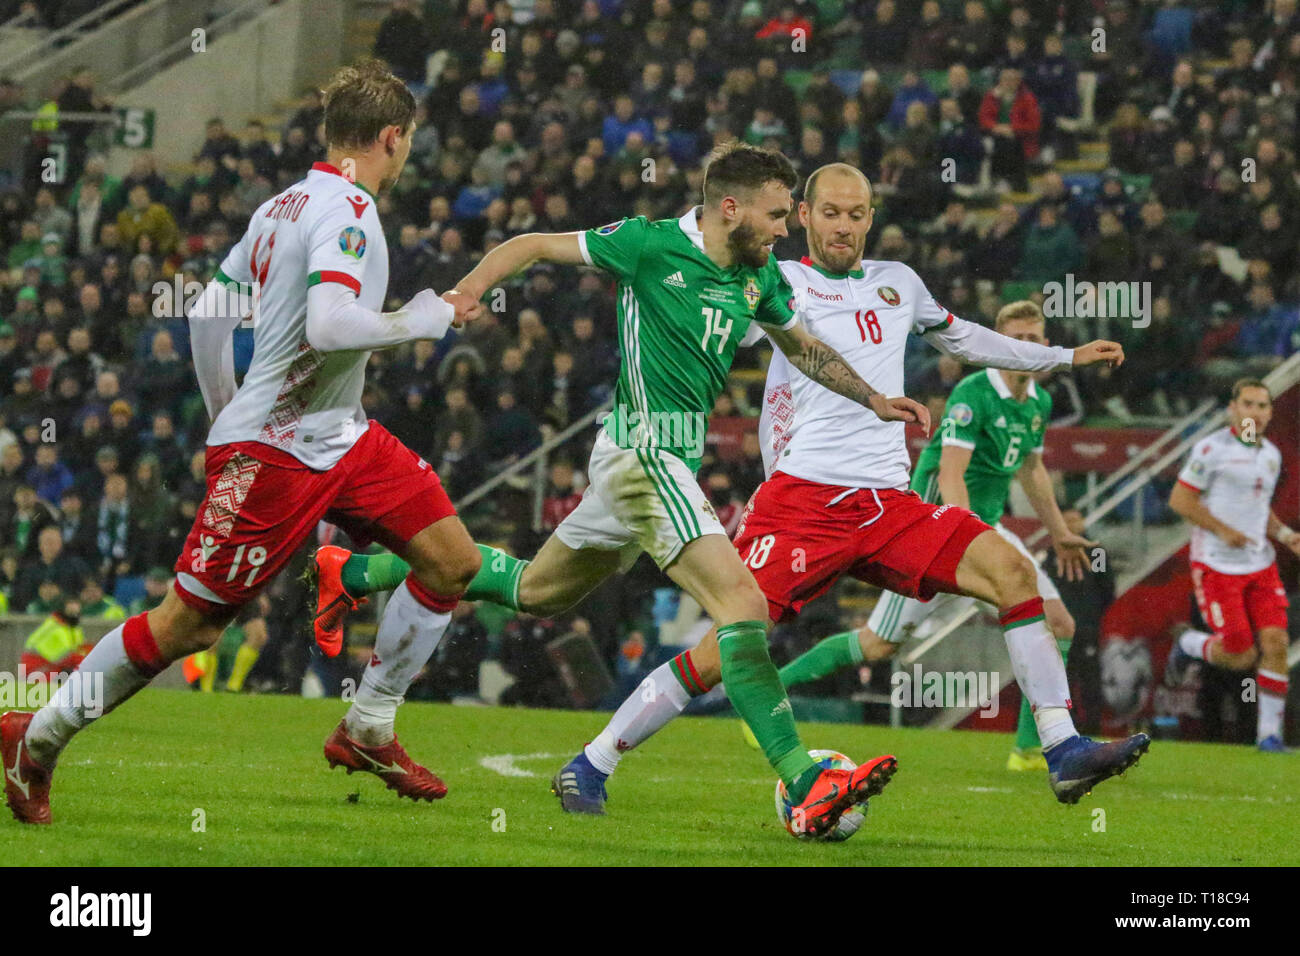 National Football Stadium at Windsor Park, Belfast, Northern Ireland. 24  March 2019. UEFA EURO 2020 Qualifier- Northern Ireland v Belarus. Action from tonight's game. Stuart Dallas (14) on the attack for Northern Ireland. Credit: David Hunter/Alamy Live News. Stock Photo